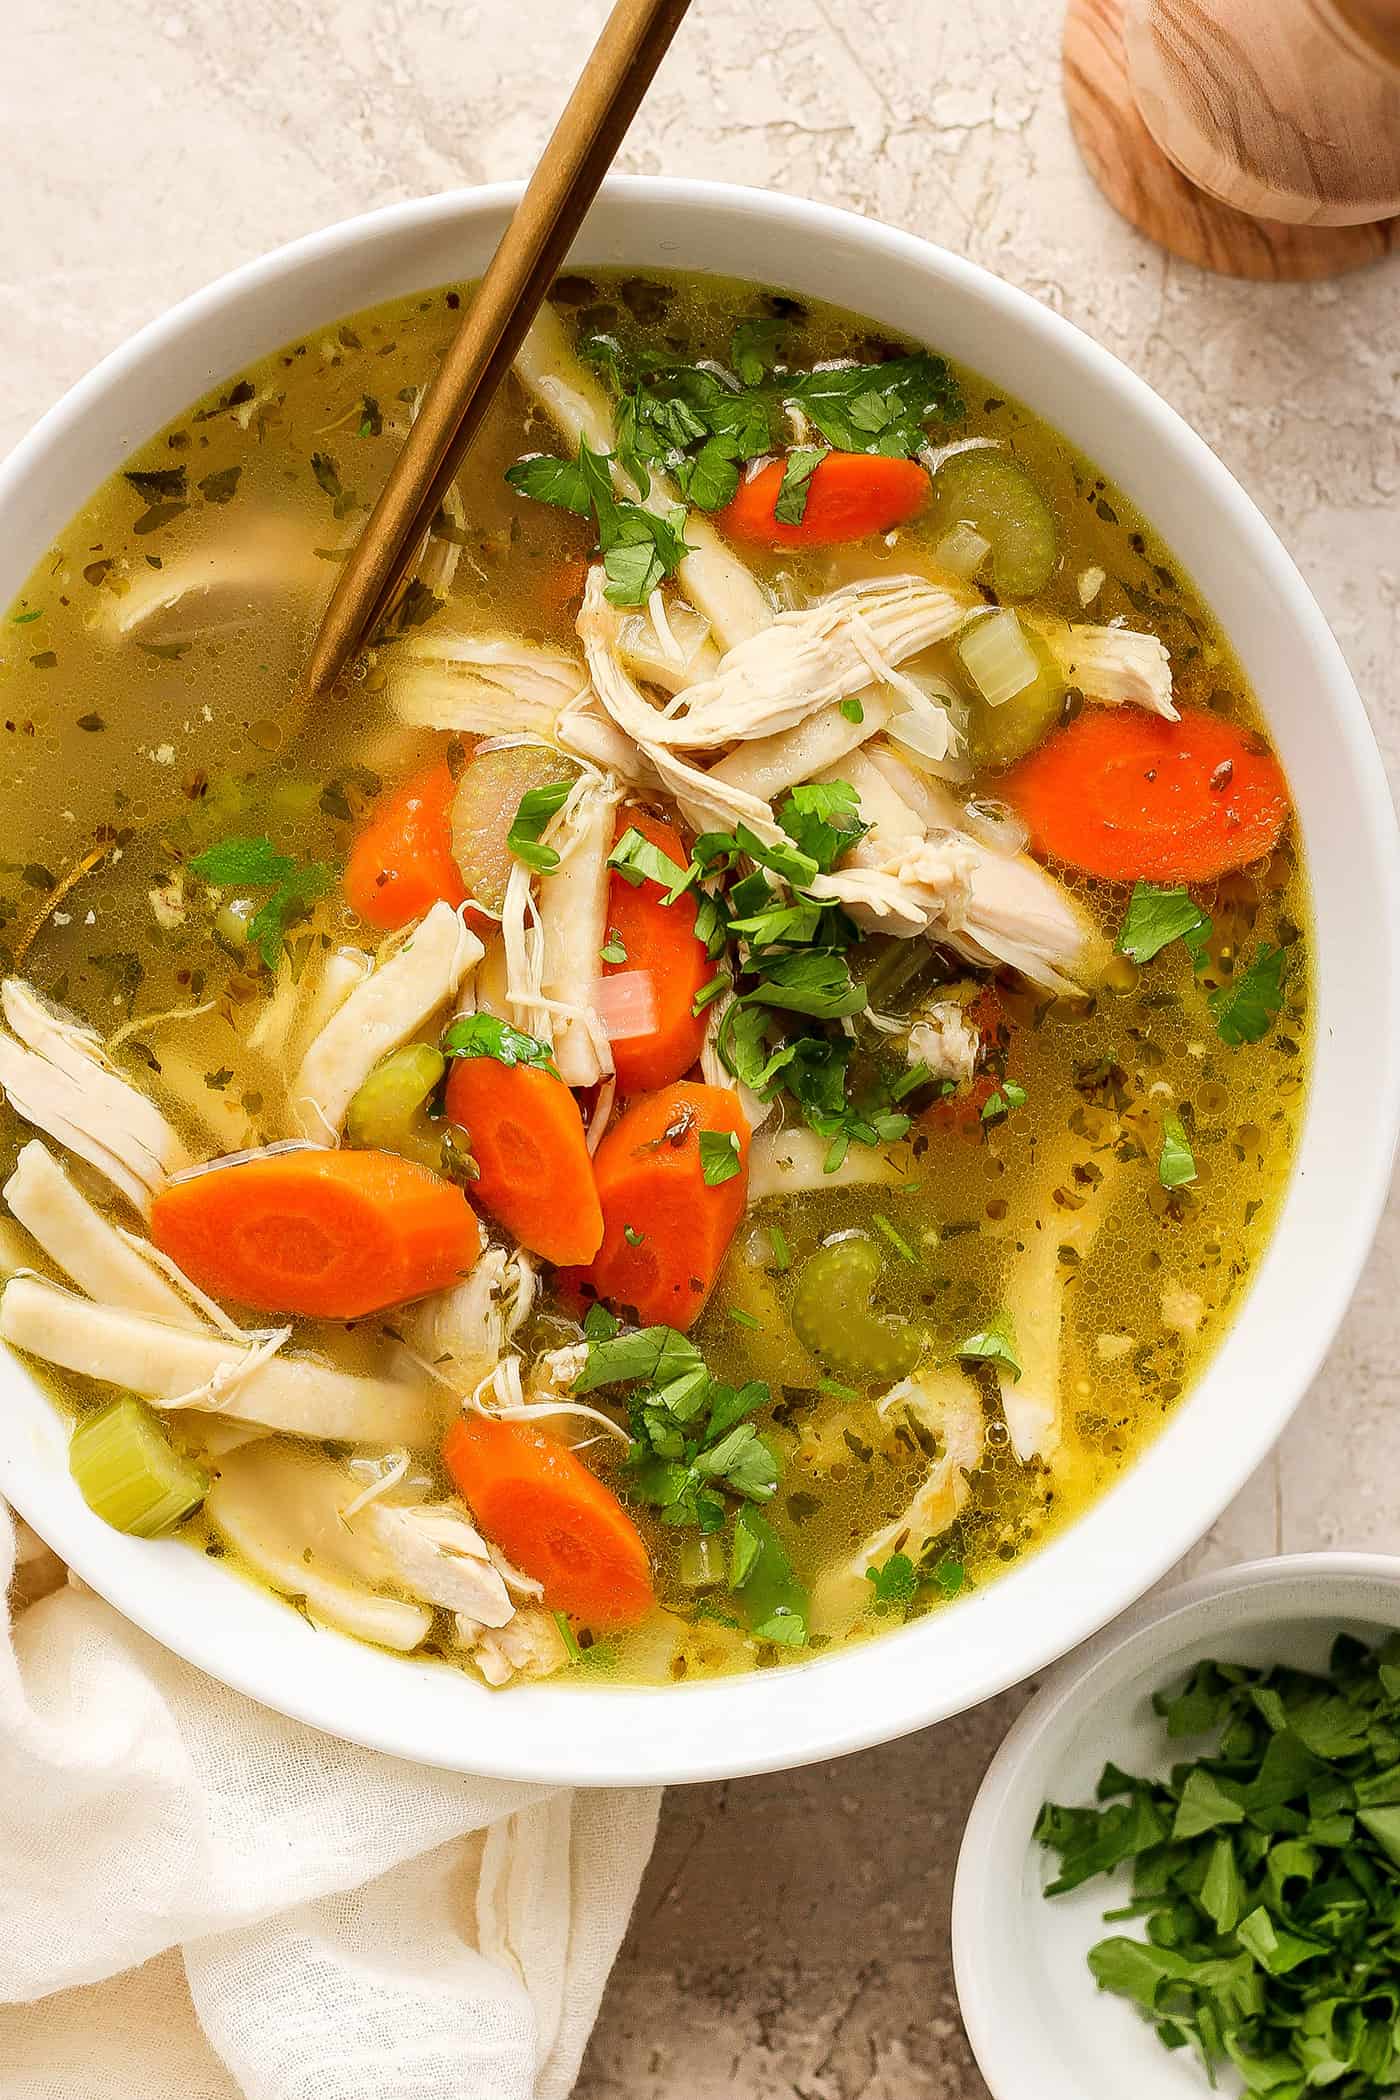 Chunks of chicken and vegetables are seen in a bowl of chicken noodle soup.